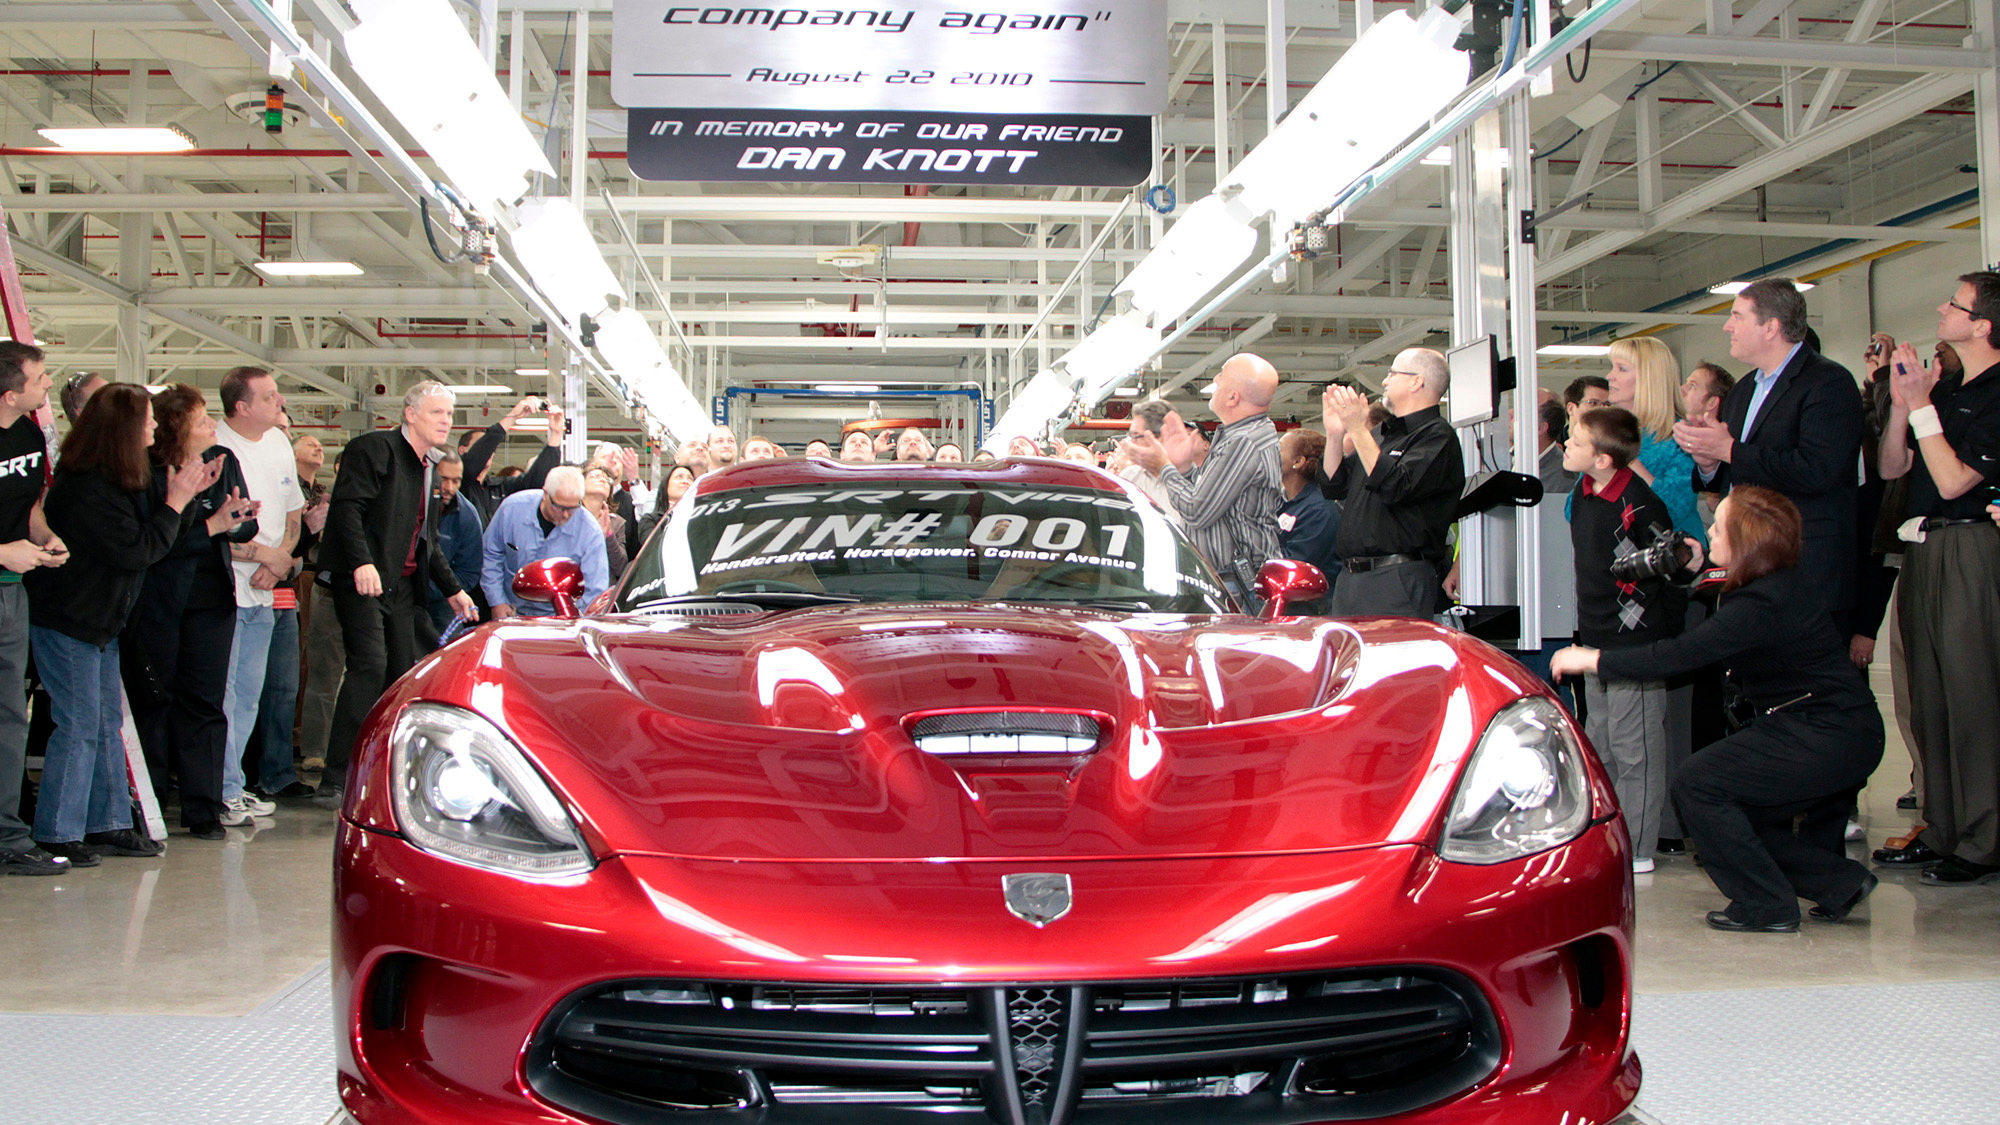 The first 2013 SRT Viper rolls off the assembly line